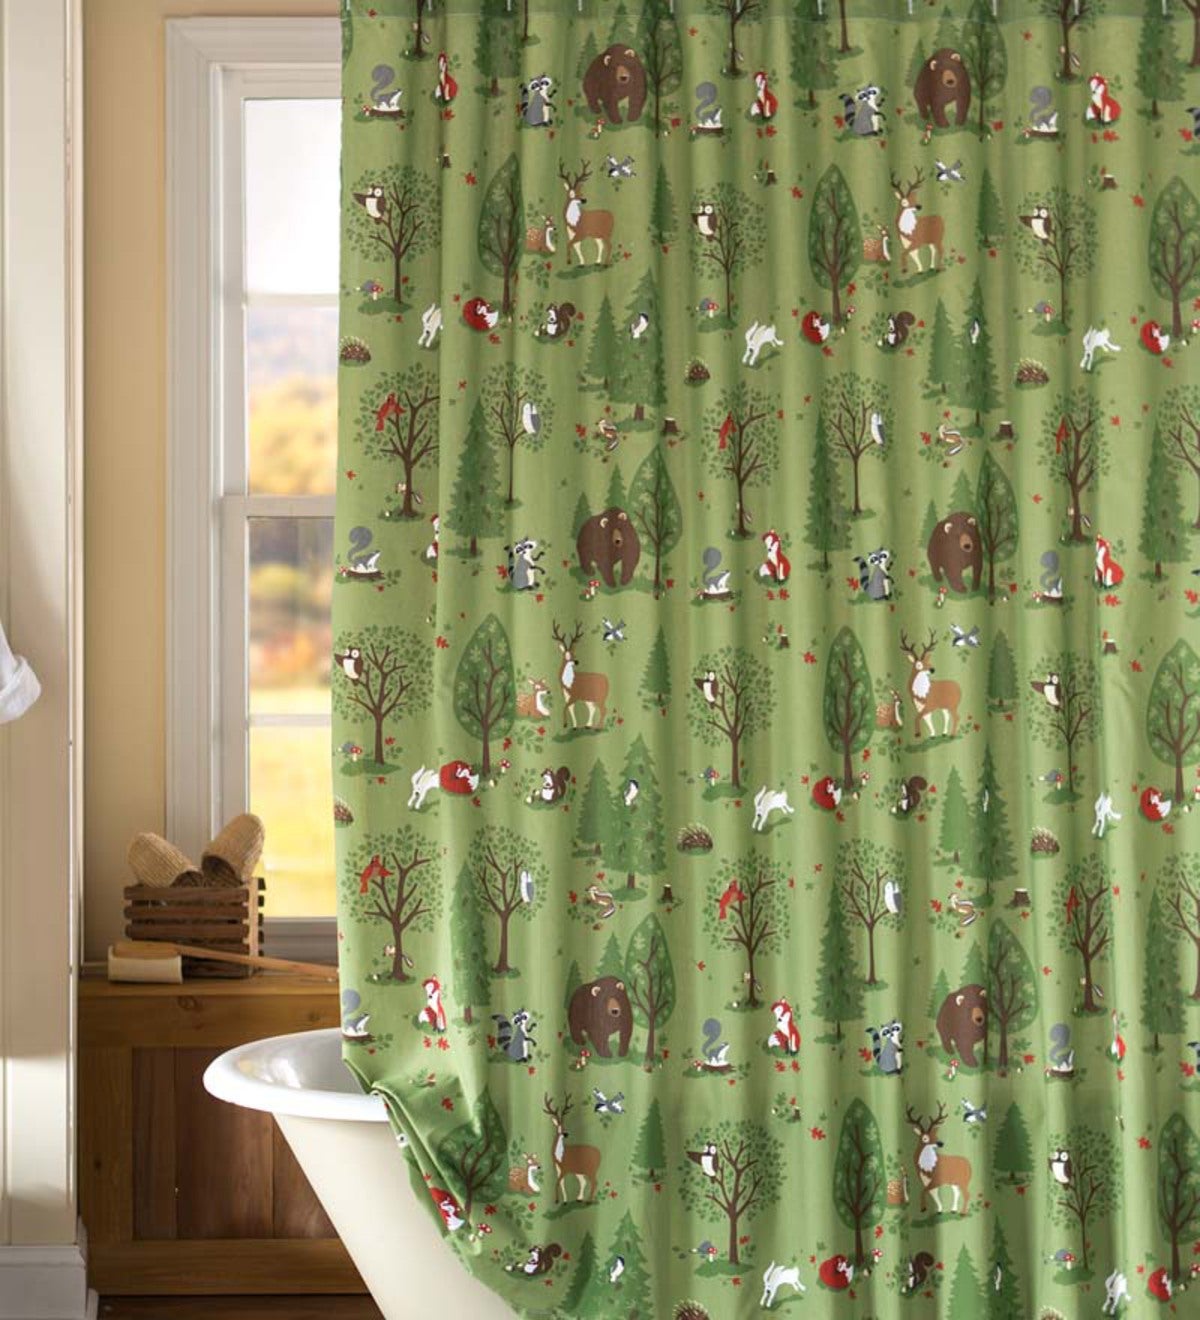 Woodland Friends Percale Shower Curtain